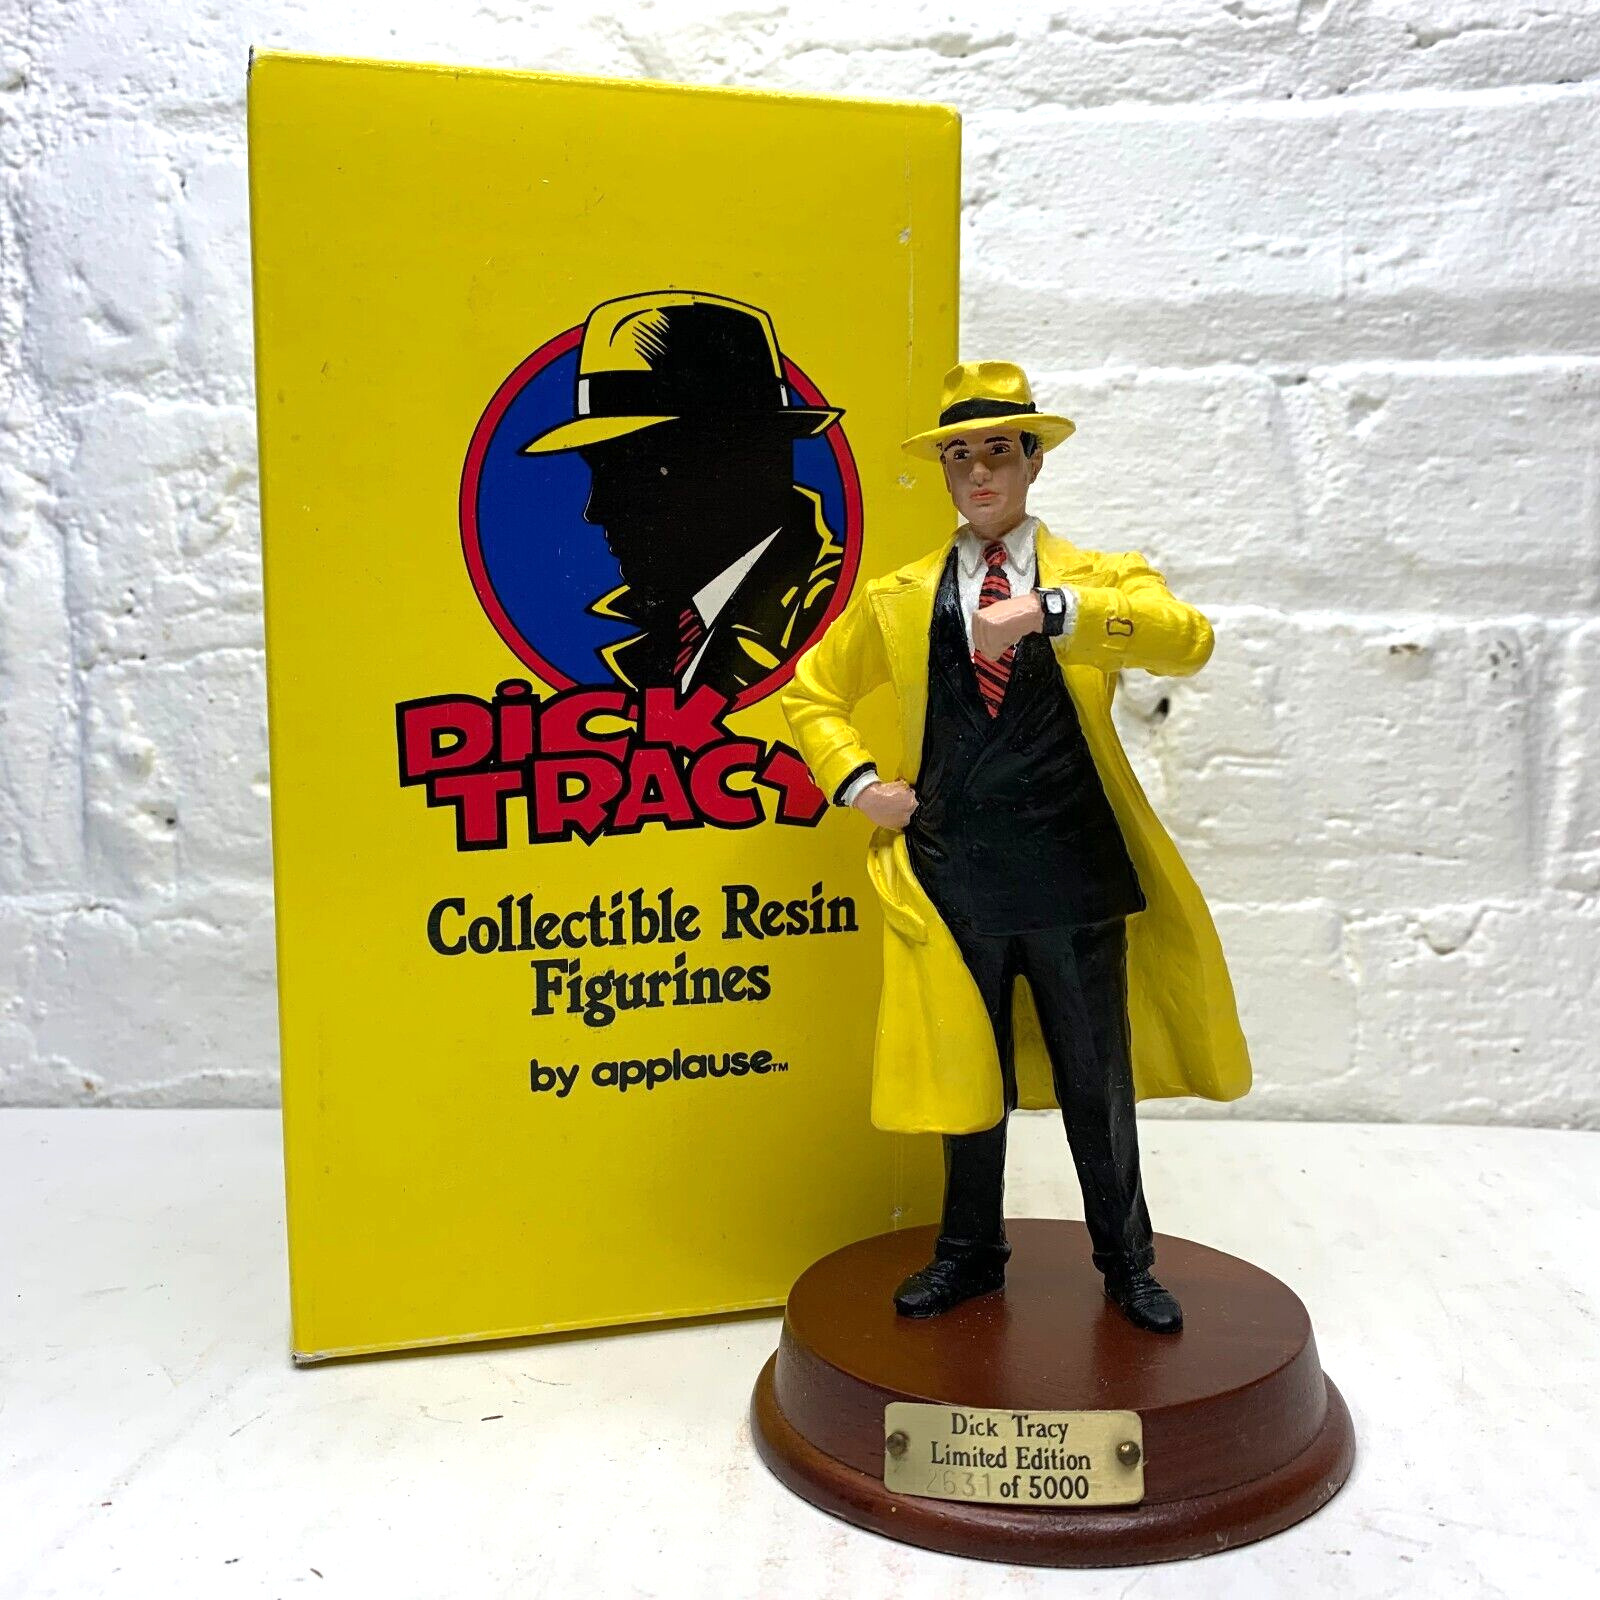 Dick Tracy Collectible Resin Figurines Limited Edition /5000 Dick Tracy Statue